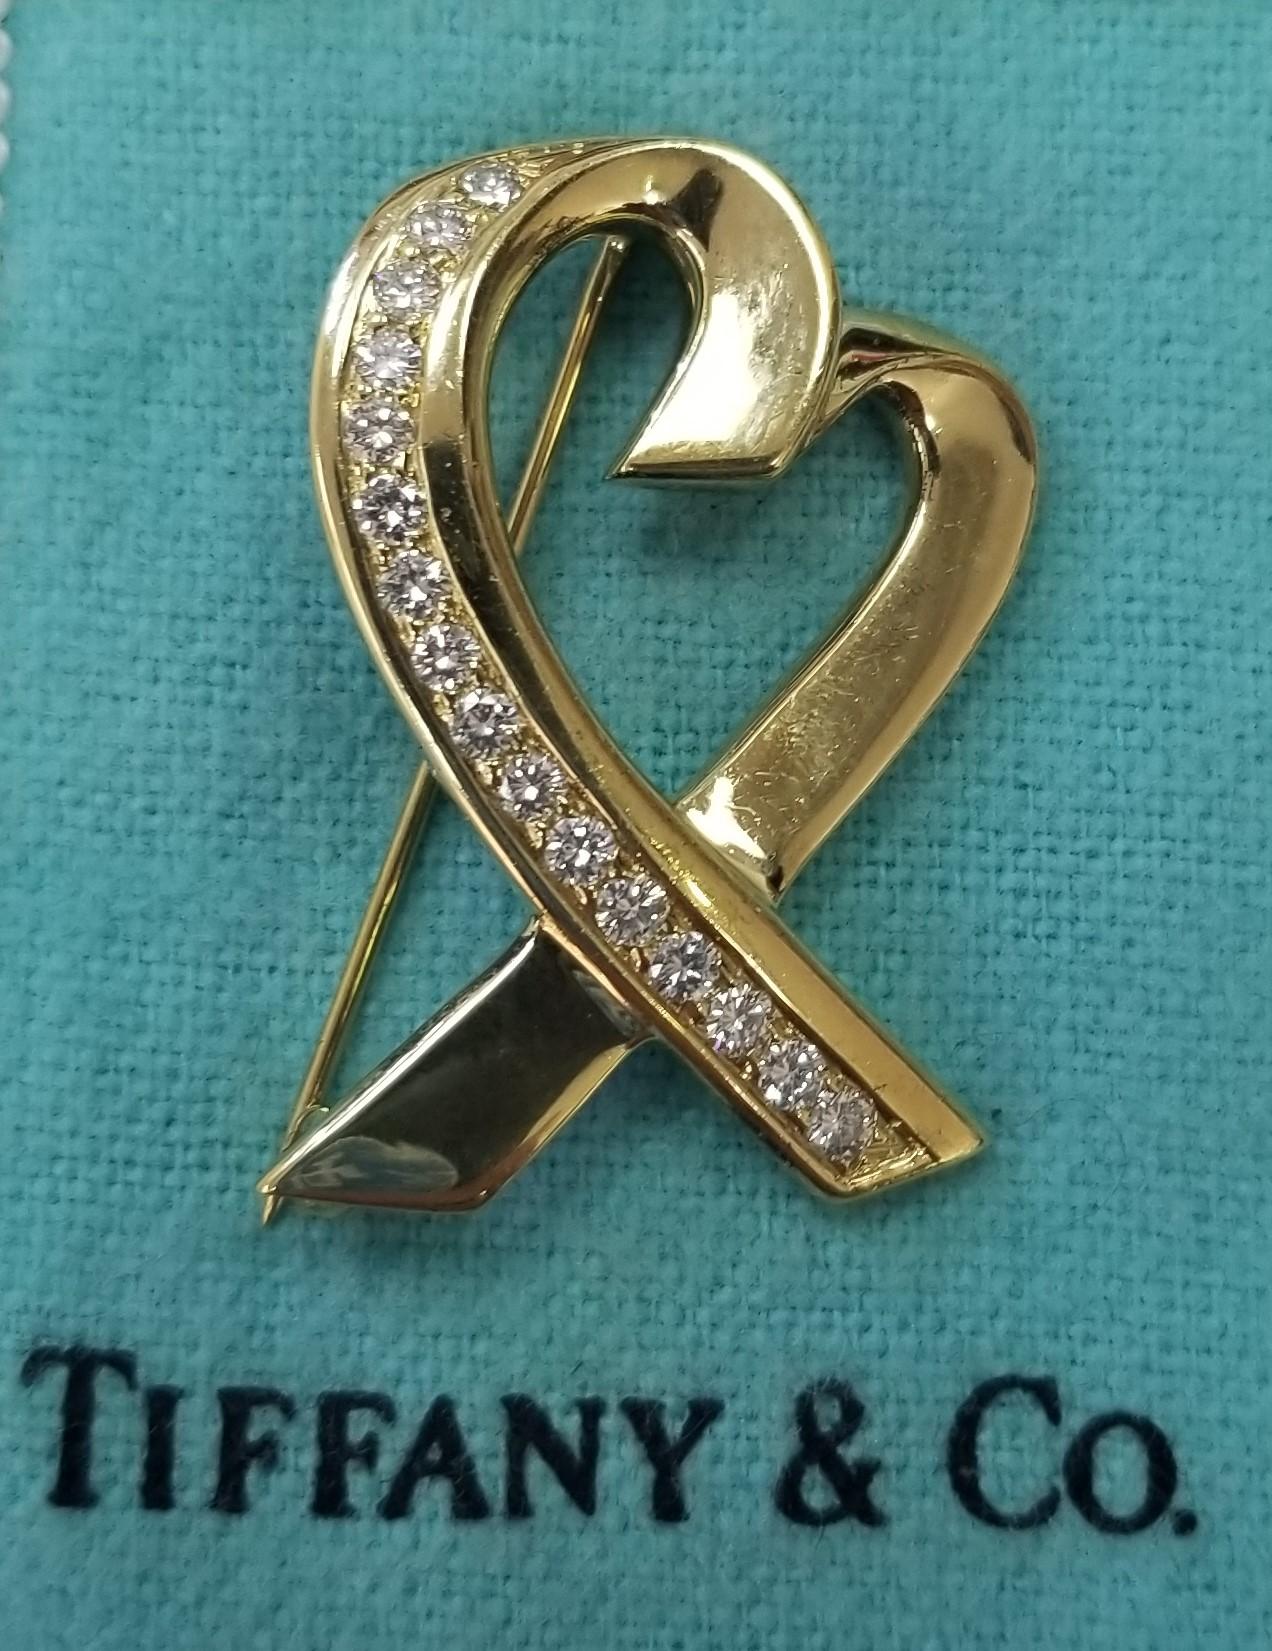 Artisan Tiffany & Co. 18K Gold Paloma Picasso Valent Heart Diamond Pin Brooch For Sale